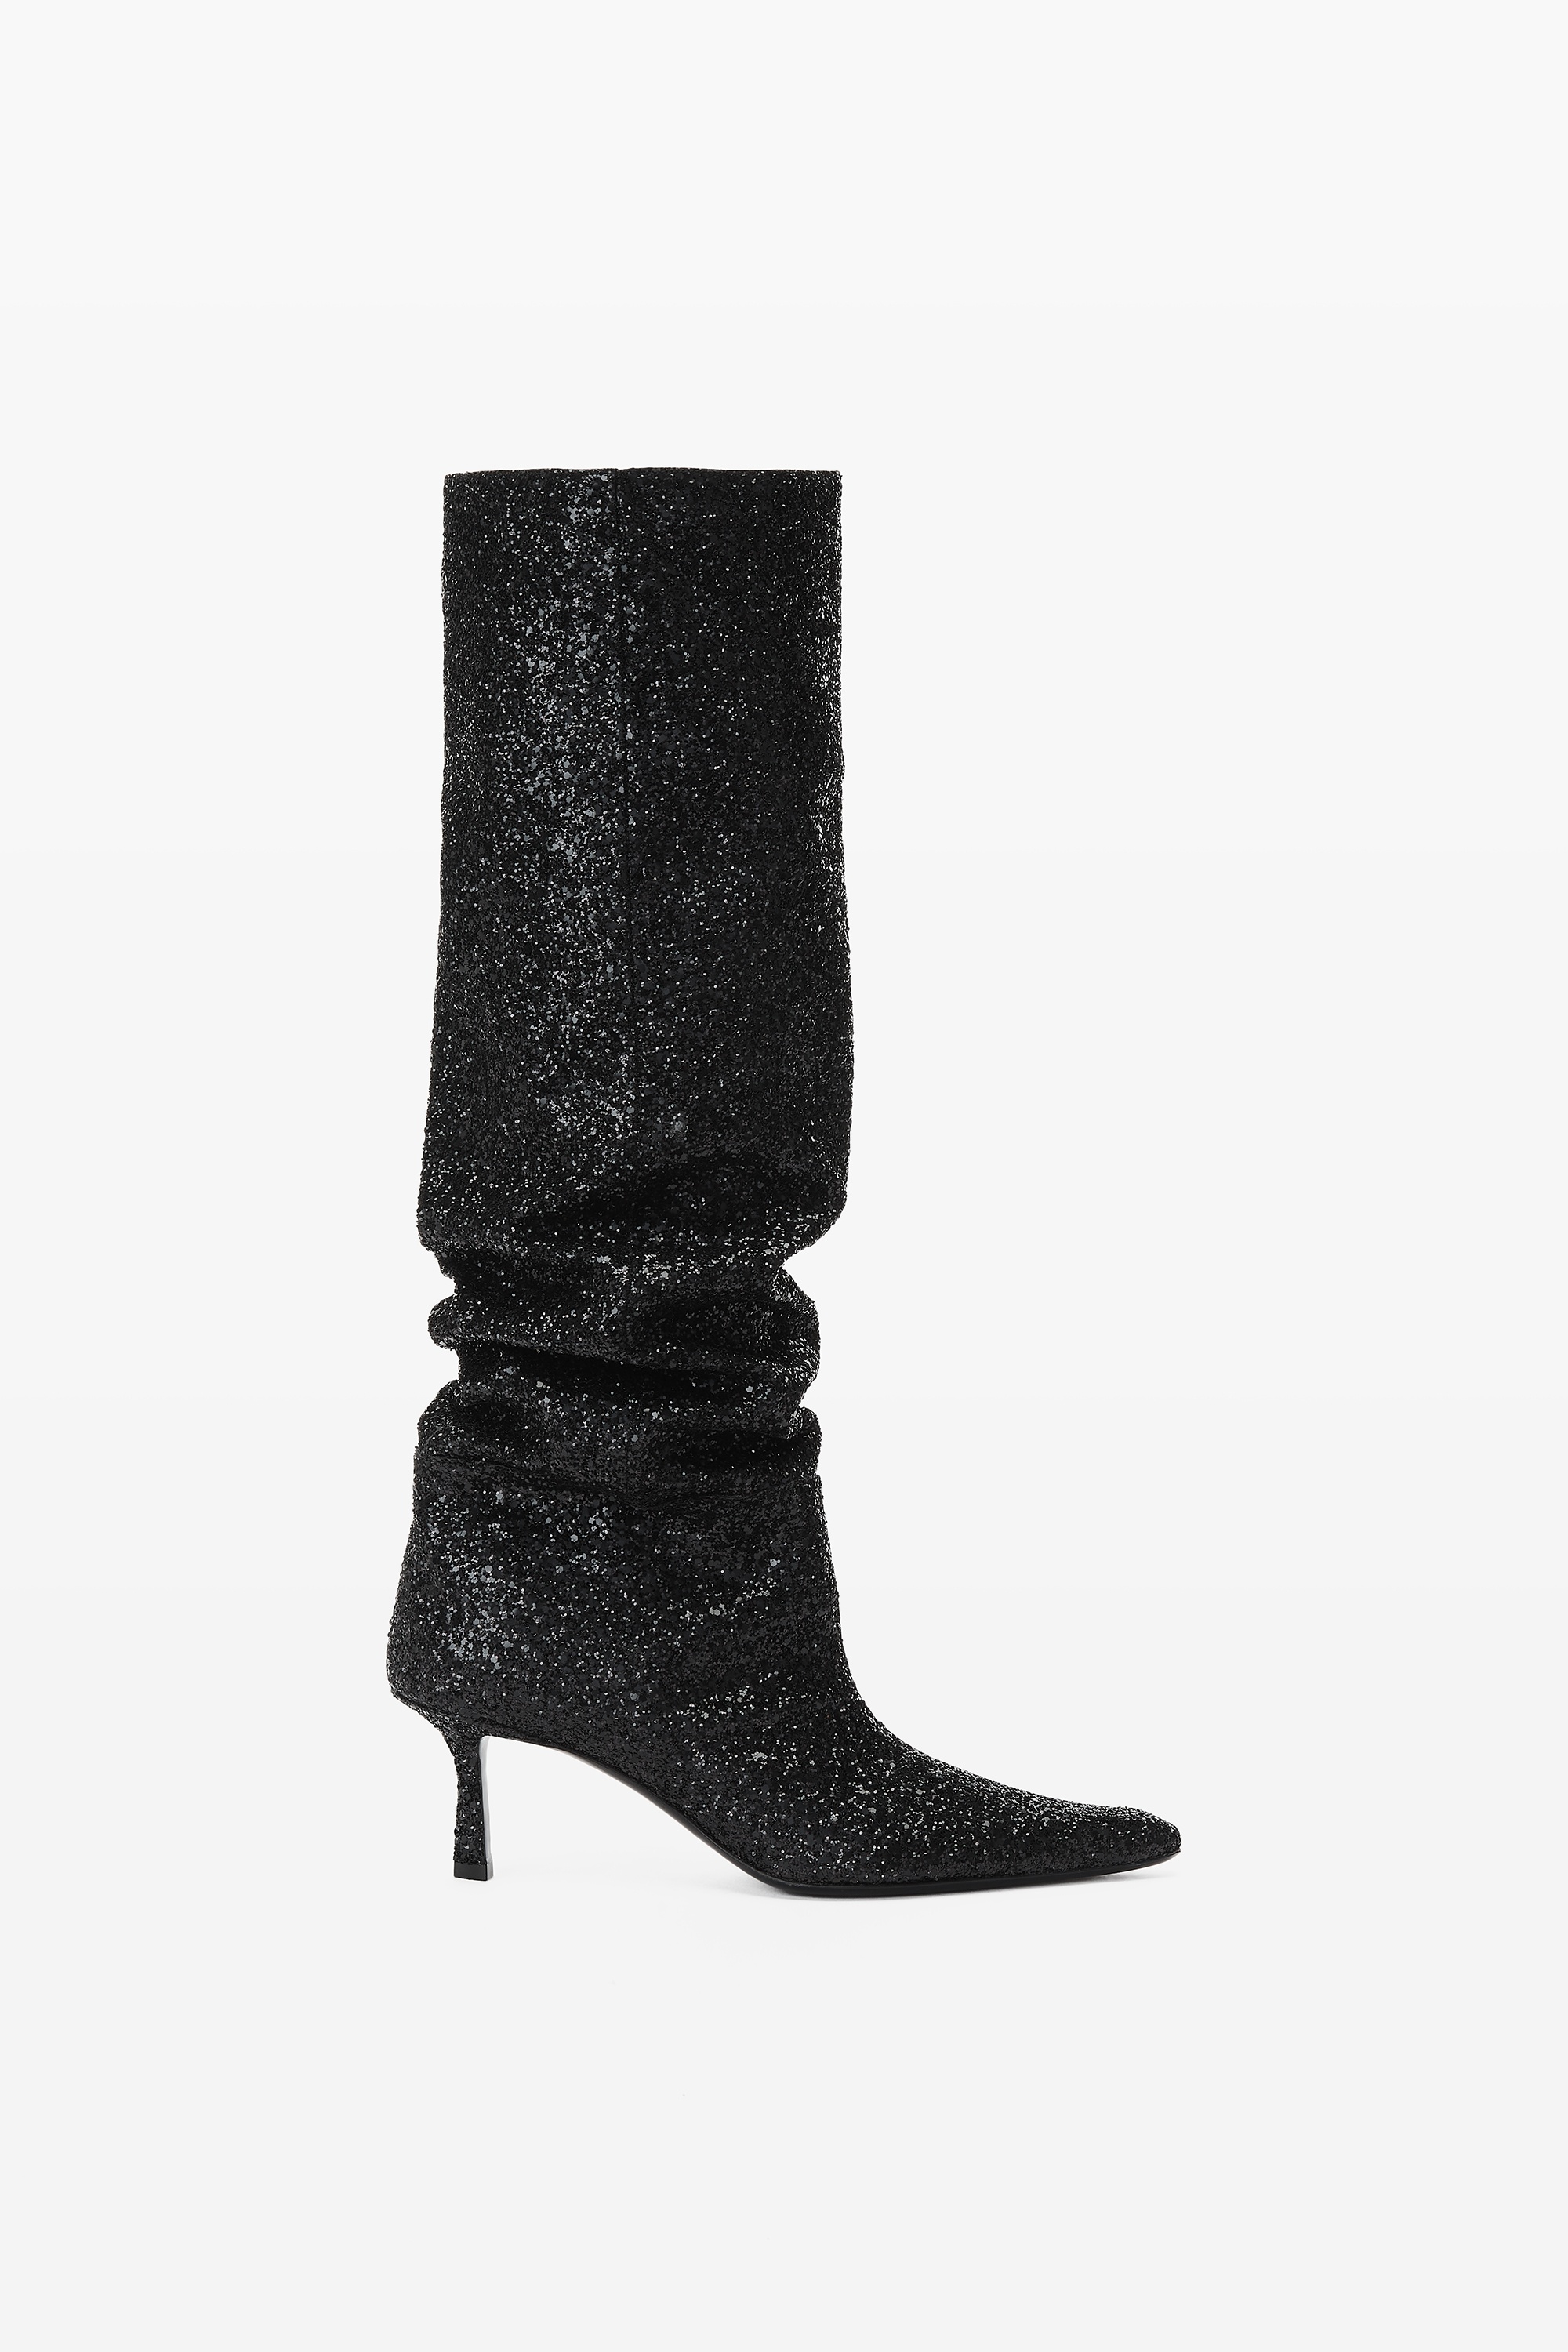 VIOLA 65 SLOUCH BOOT IN GLITTER - 1